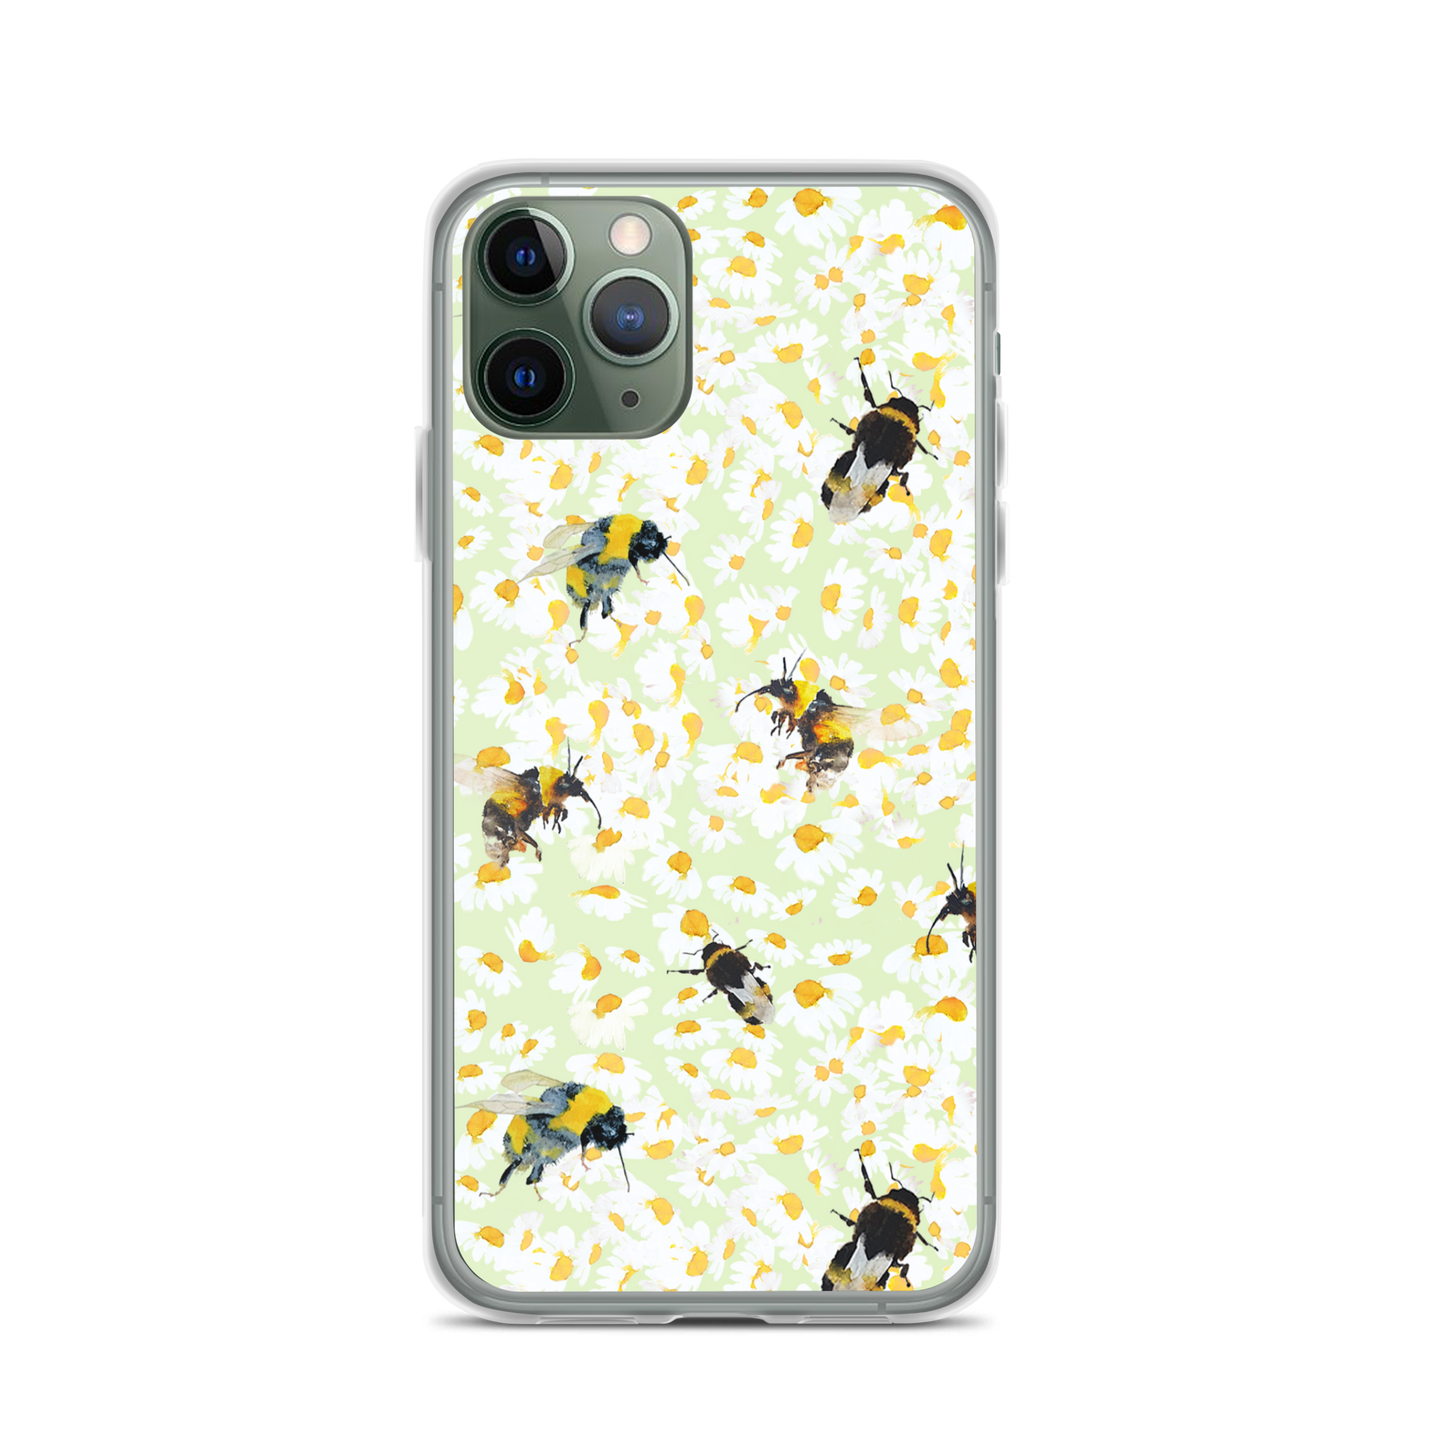 Bee and Daisy Design Mobile Phone by Annie Grant Artist